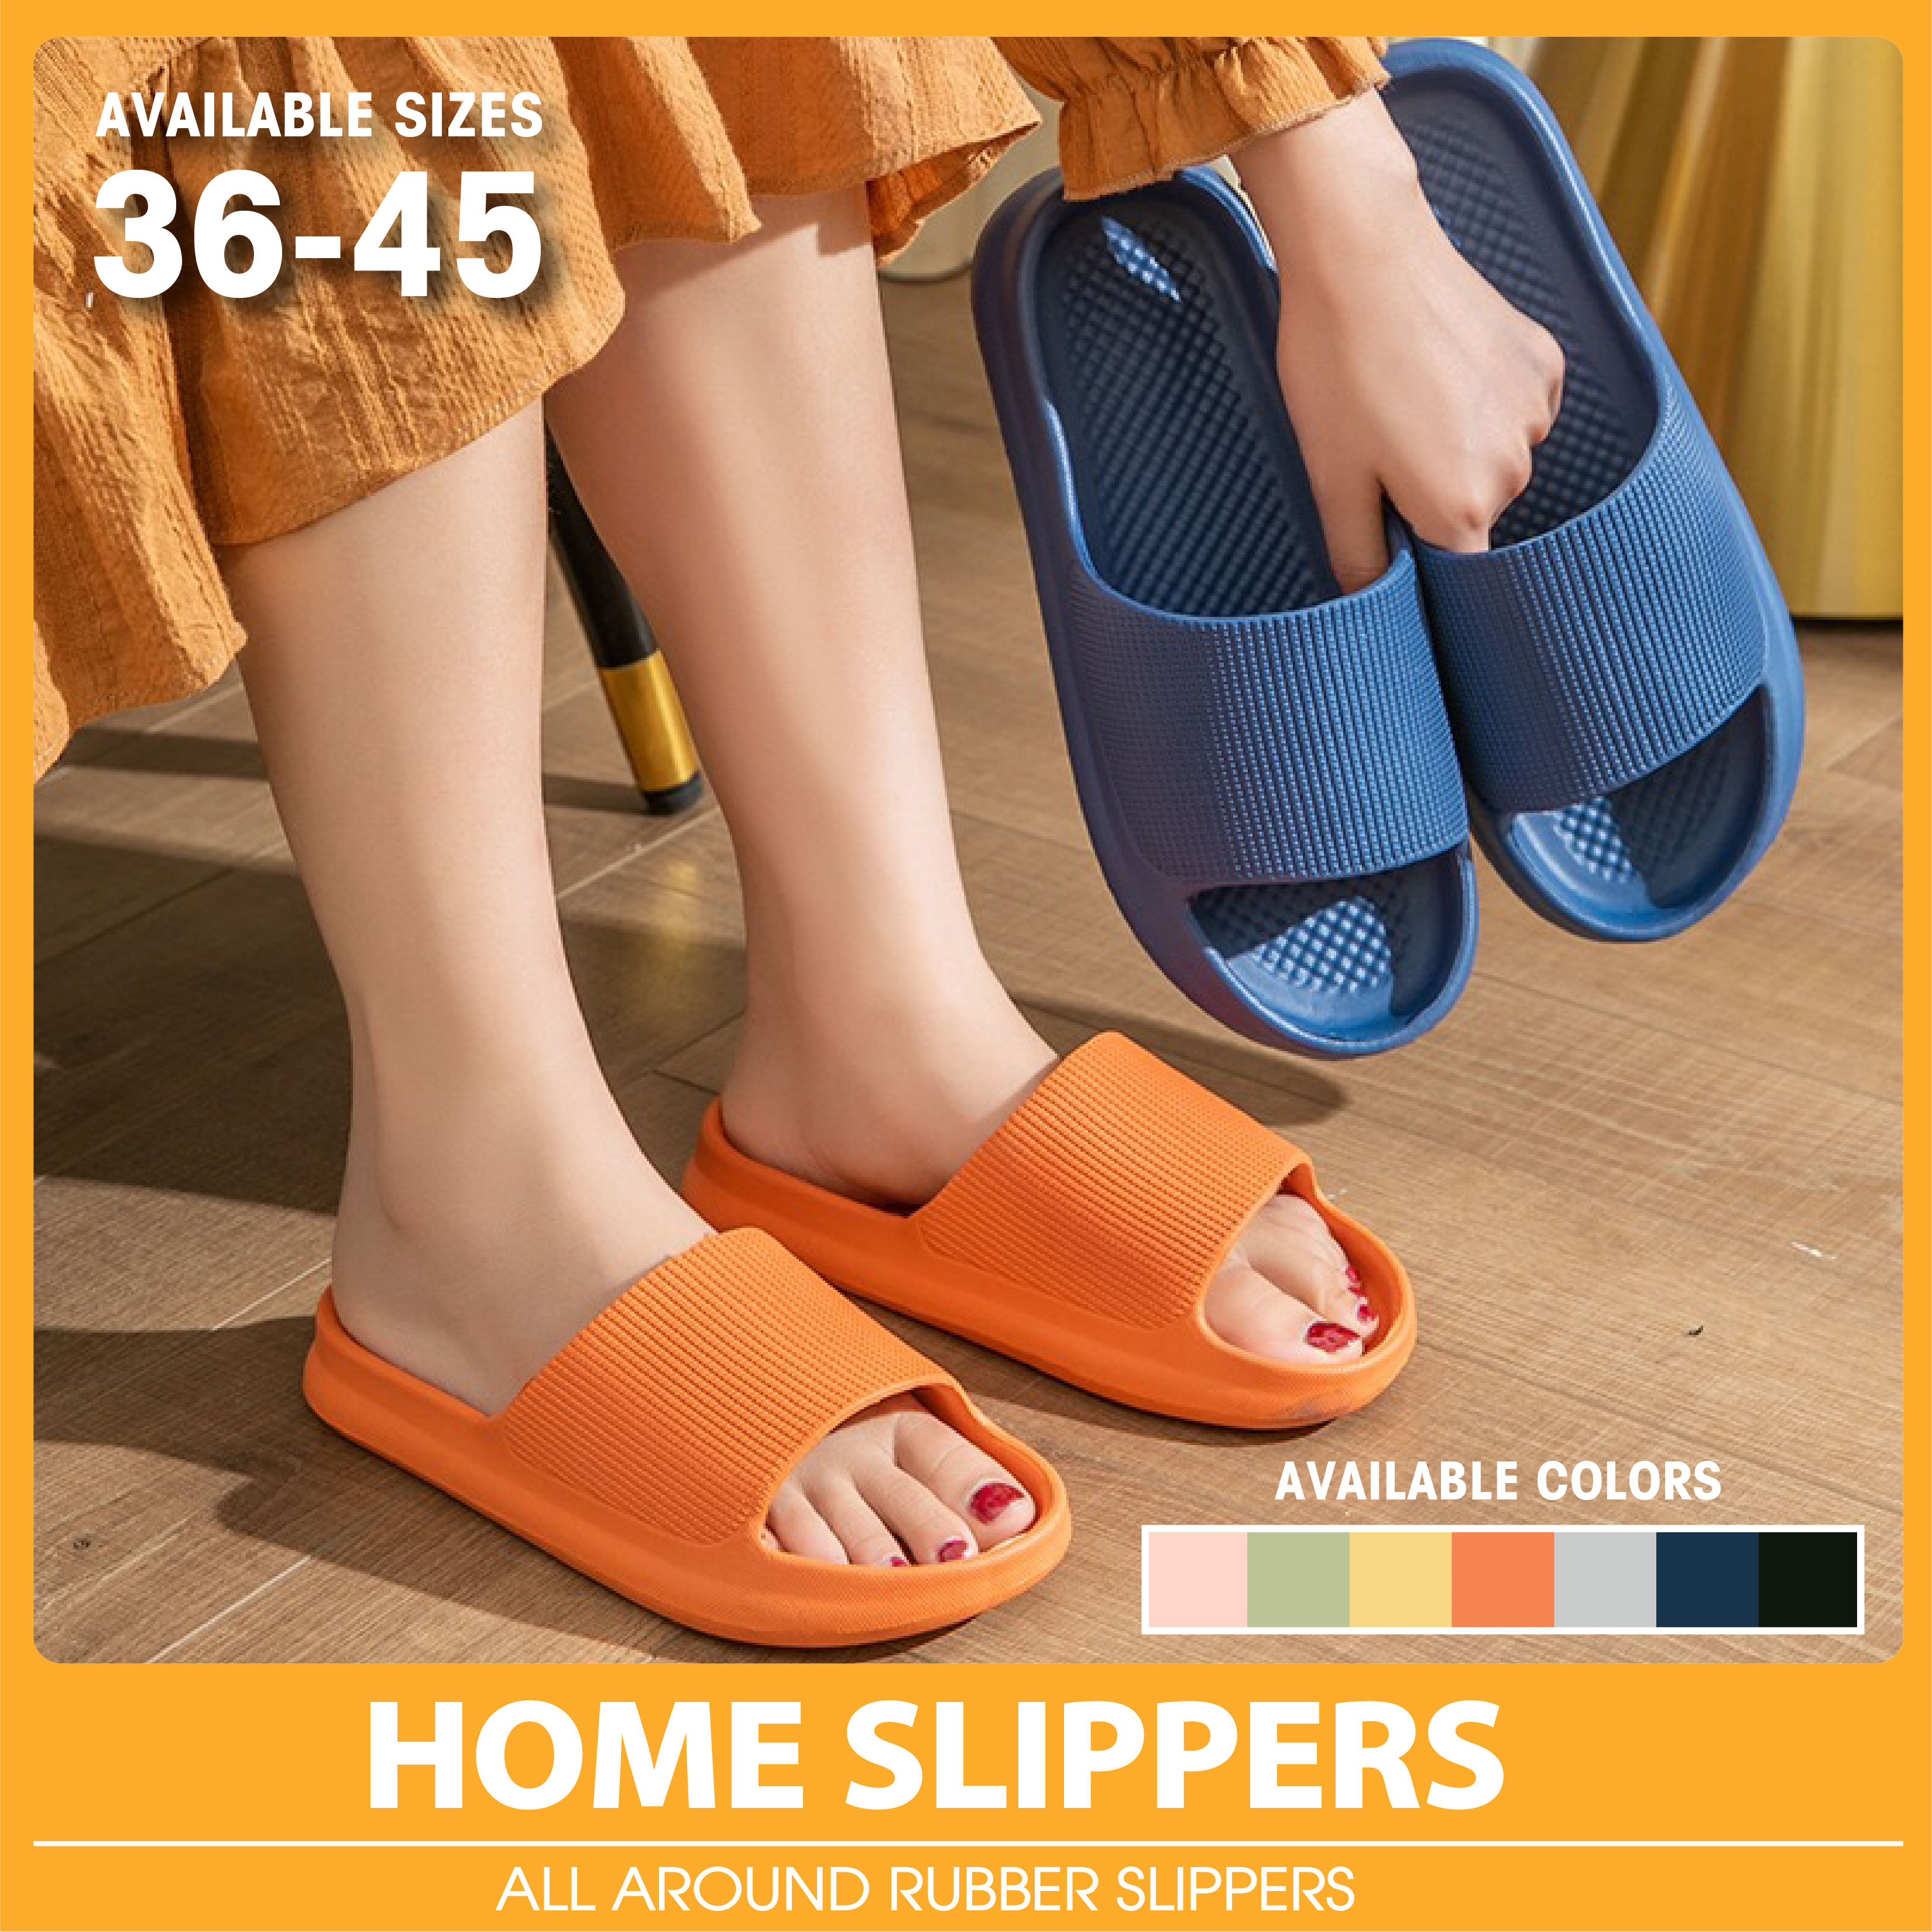 House of EQA Unisex Home Slippers Bathroom Slippers Bedroom Slippers for Men & Women Flip Flops Sandals Indoor Outdoor Slippers Assorted Color Soft EVA Material with Nonslip Base Soft and Comfortable